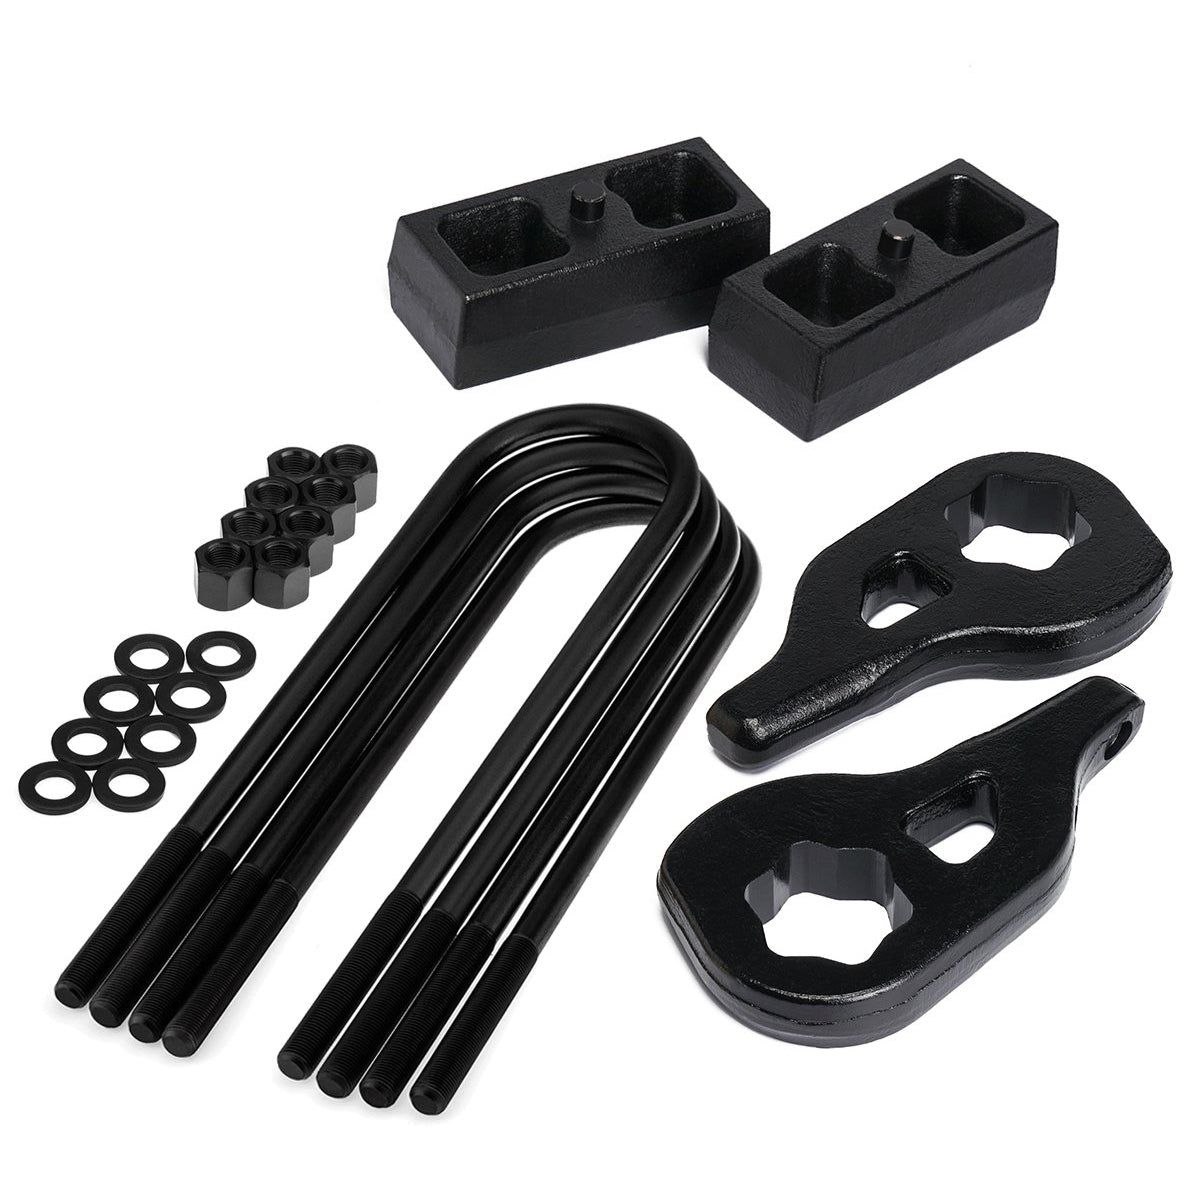 2002-2005 Dodge Ram 1500 Full Lift Kit with Shock Extensions Bump Stops and Torsion Key Unloading/Removal Tool